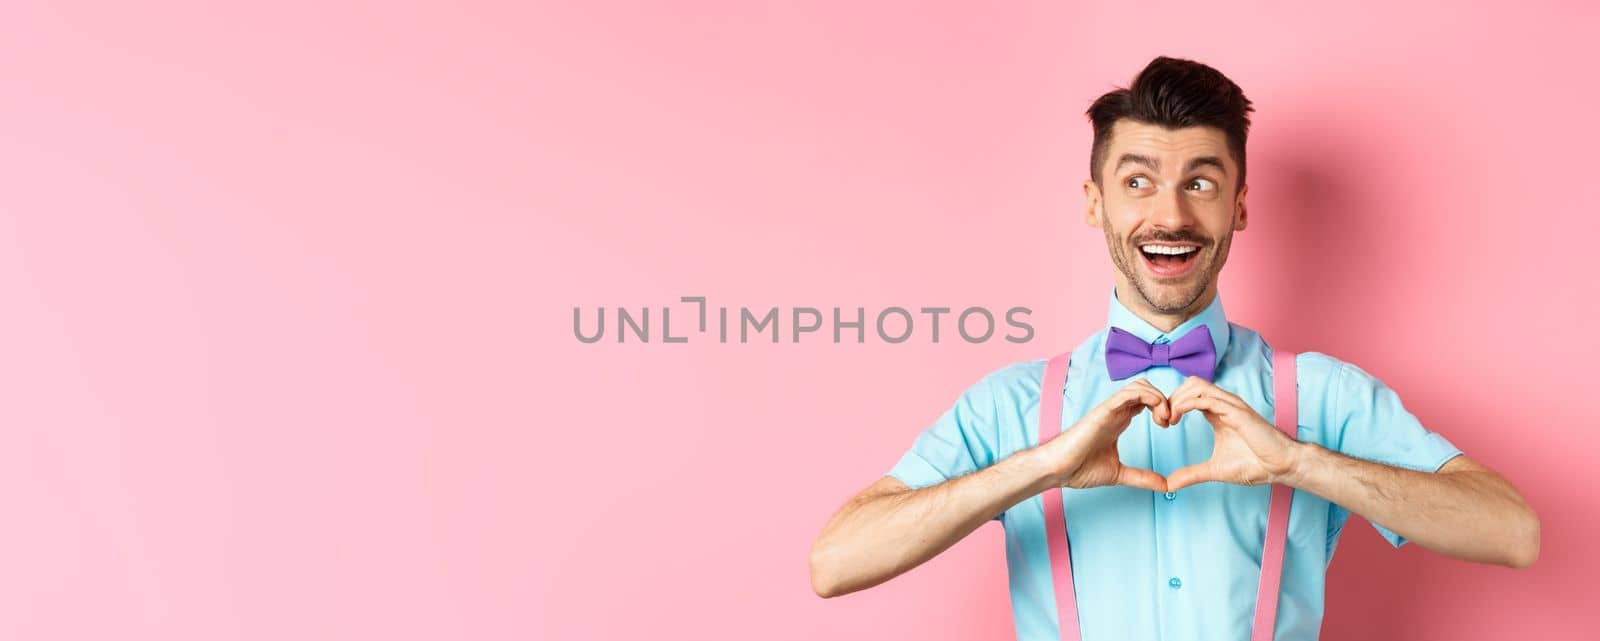 Happy Valentines day. Cheerful male model enjoying romantic date, showing heart sign, say I love you and looking left with happy smile, standing over pink background.